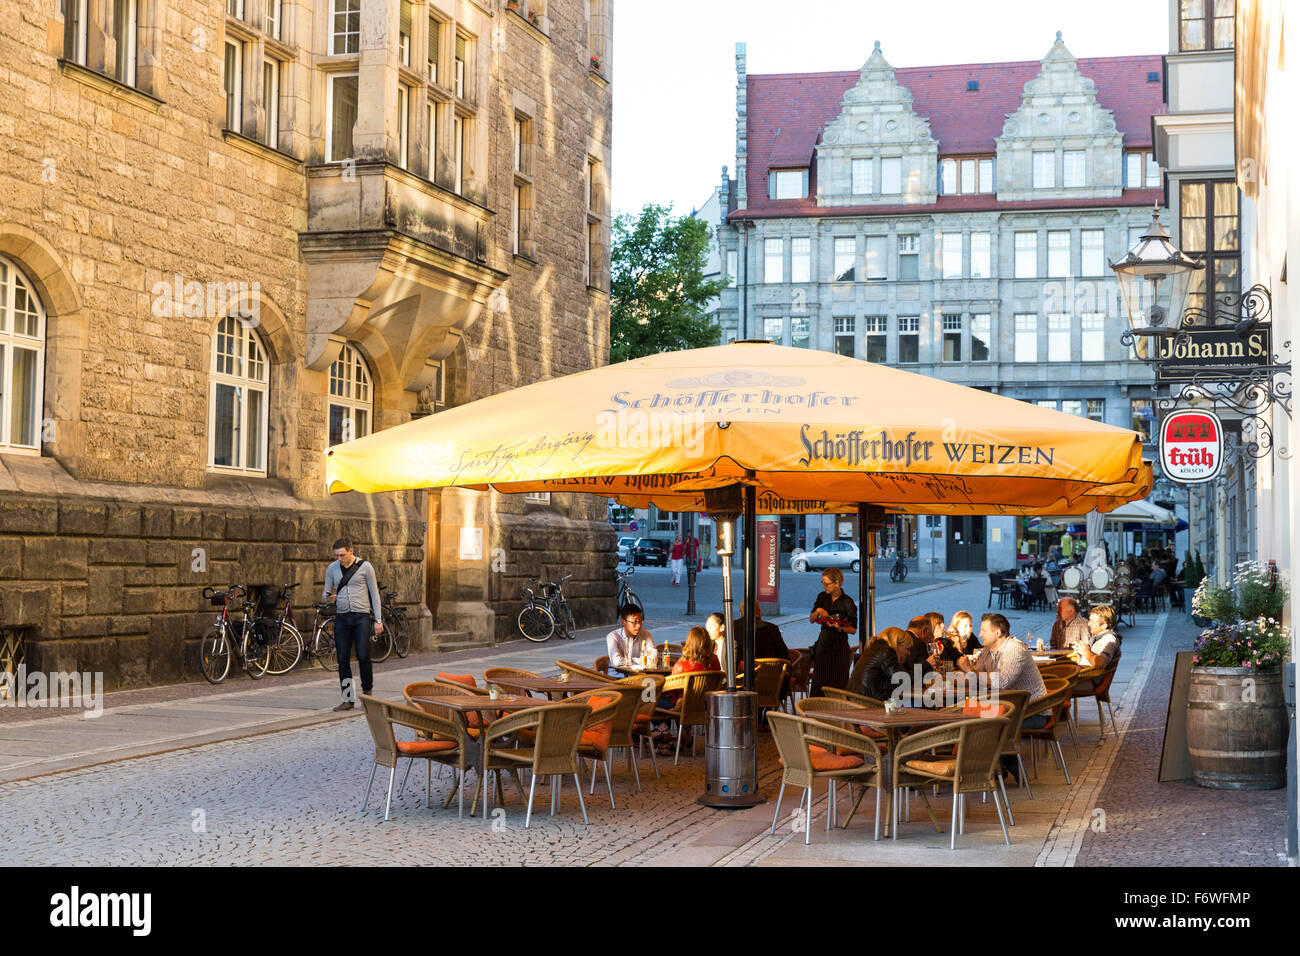 Guests in a pavement restaurant in the evening, Leipzig, Saxony, Germany Stock Photo